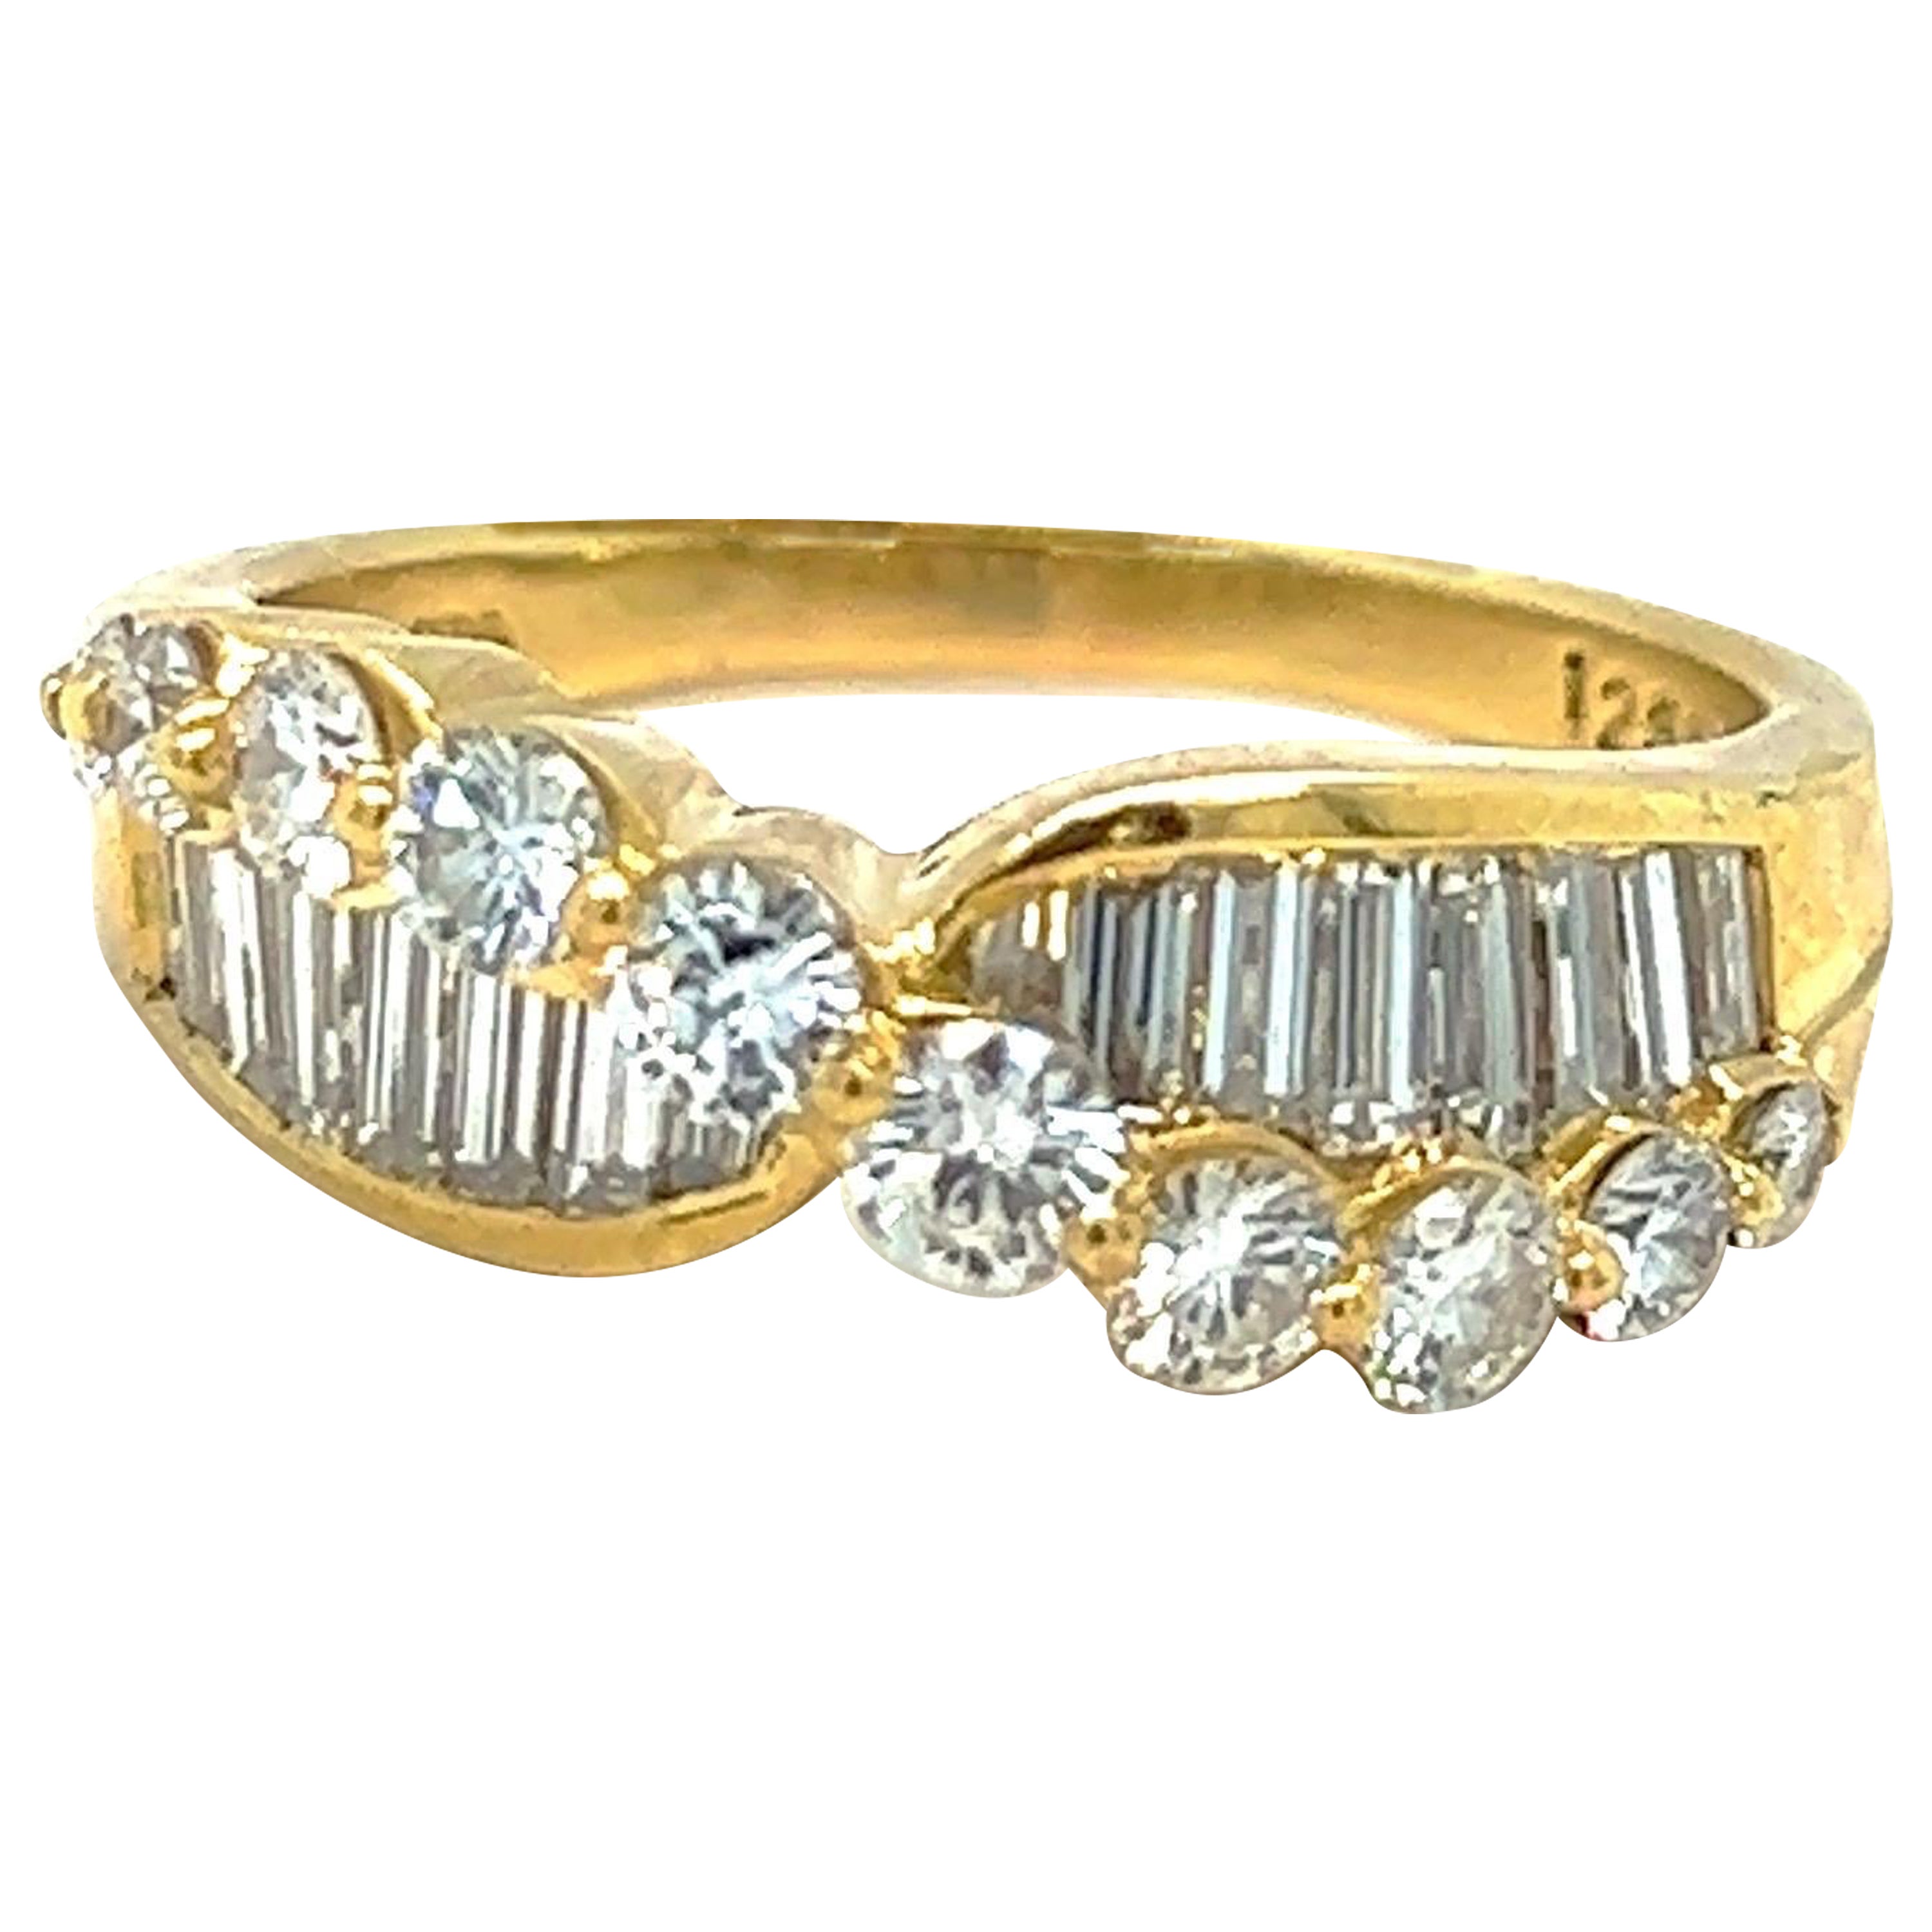 Nova 18KT Yellow Gold 1.93 Cts. Round and Baguette Diamond Ring For Sale